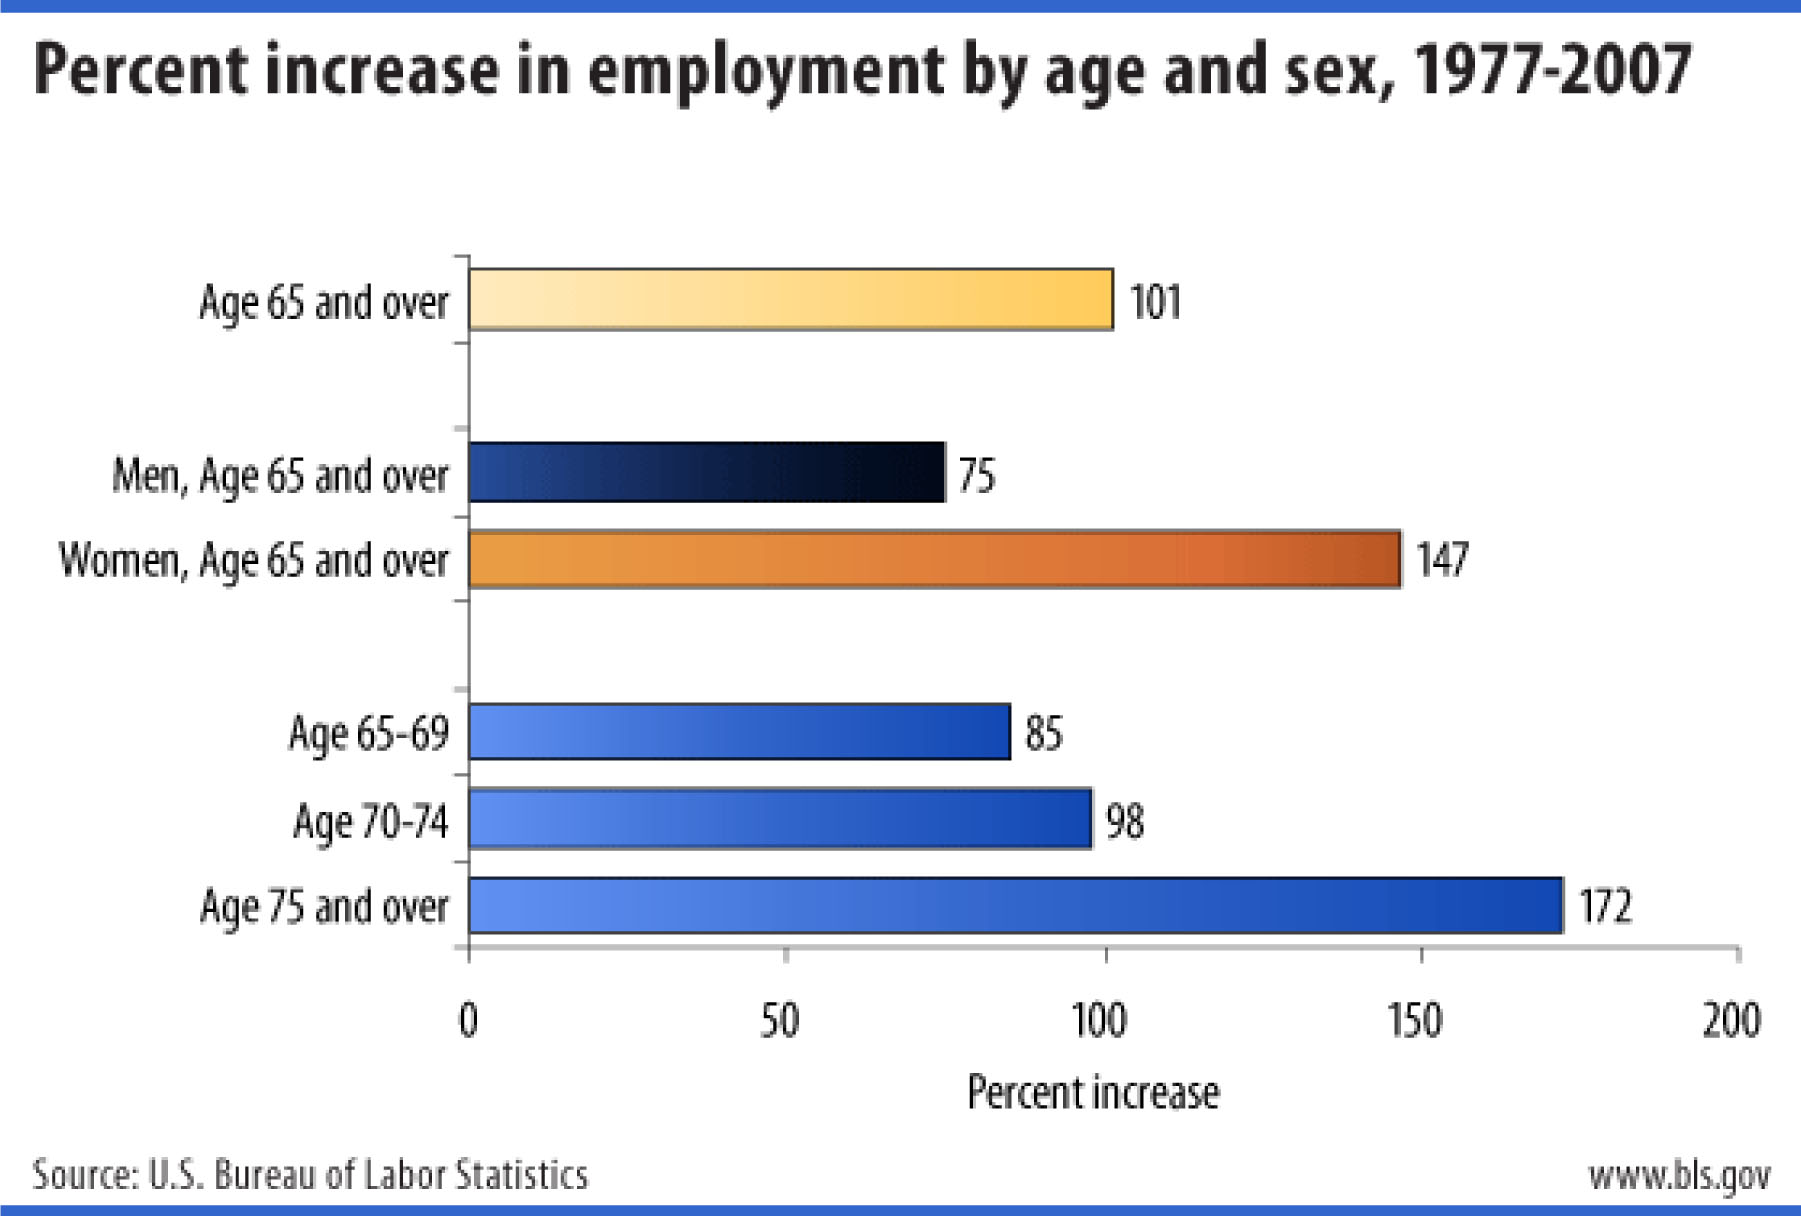 Percent increase in employment by age and sex, 1977-2007